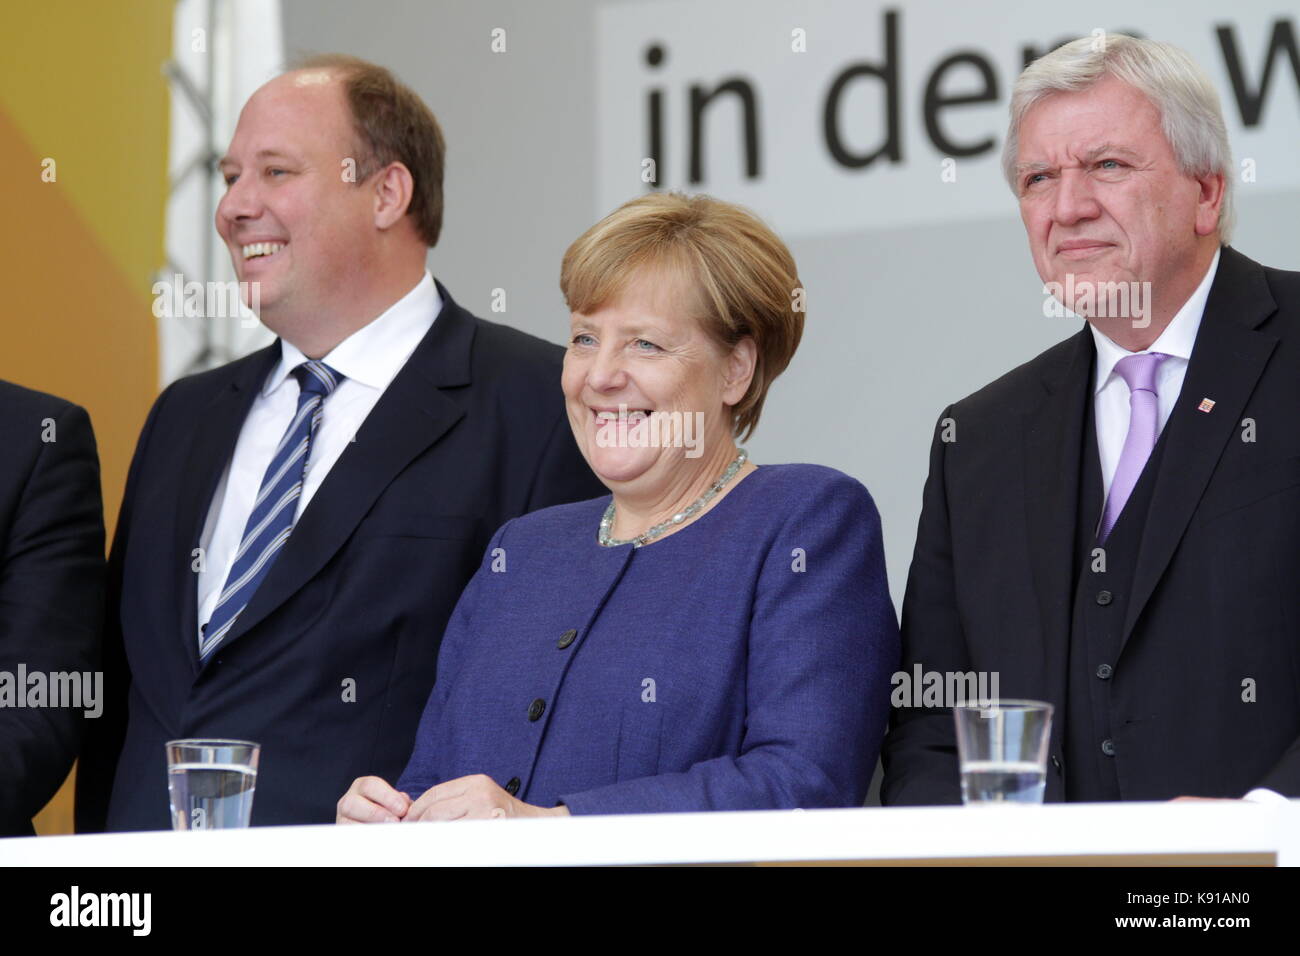 Giessen, Germany. 21st September, 2017. Angela Merkel, Chancellor of Germany holds an election campaign speech as leader of the Christian Democratic Union and leading candidate as federal chancellor  to the federal Bundestag elections (24th Sept 2017) at Brandplatz in Giessen, Germany. Here: Angela Merkel (center) with Helge Braun (left), minister of state at german chancellery, member of parliament and CDU direct candidate of constituency Giessen (173), and Volker Bouffier (right), prime minister of german state Hesse.  Credit: Christian Lademann Stock Photo